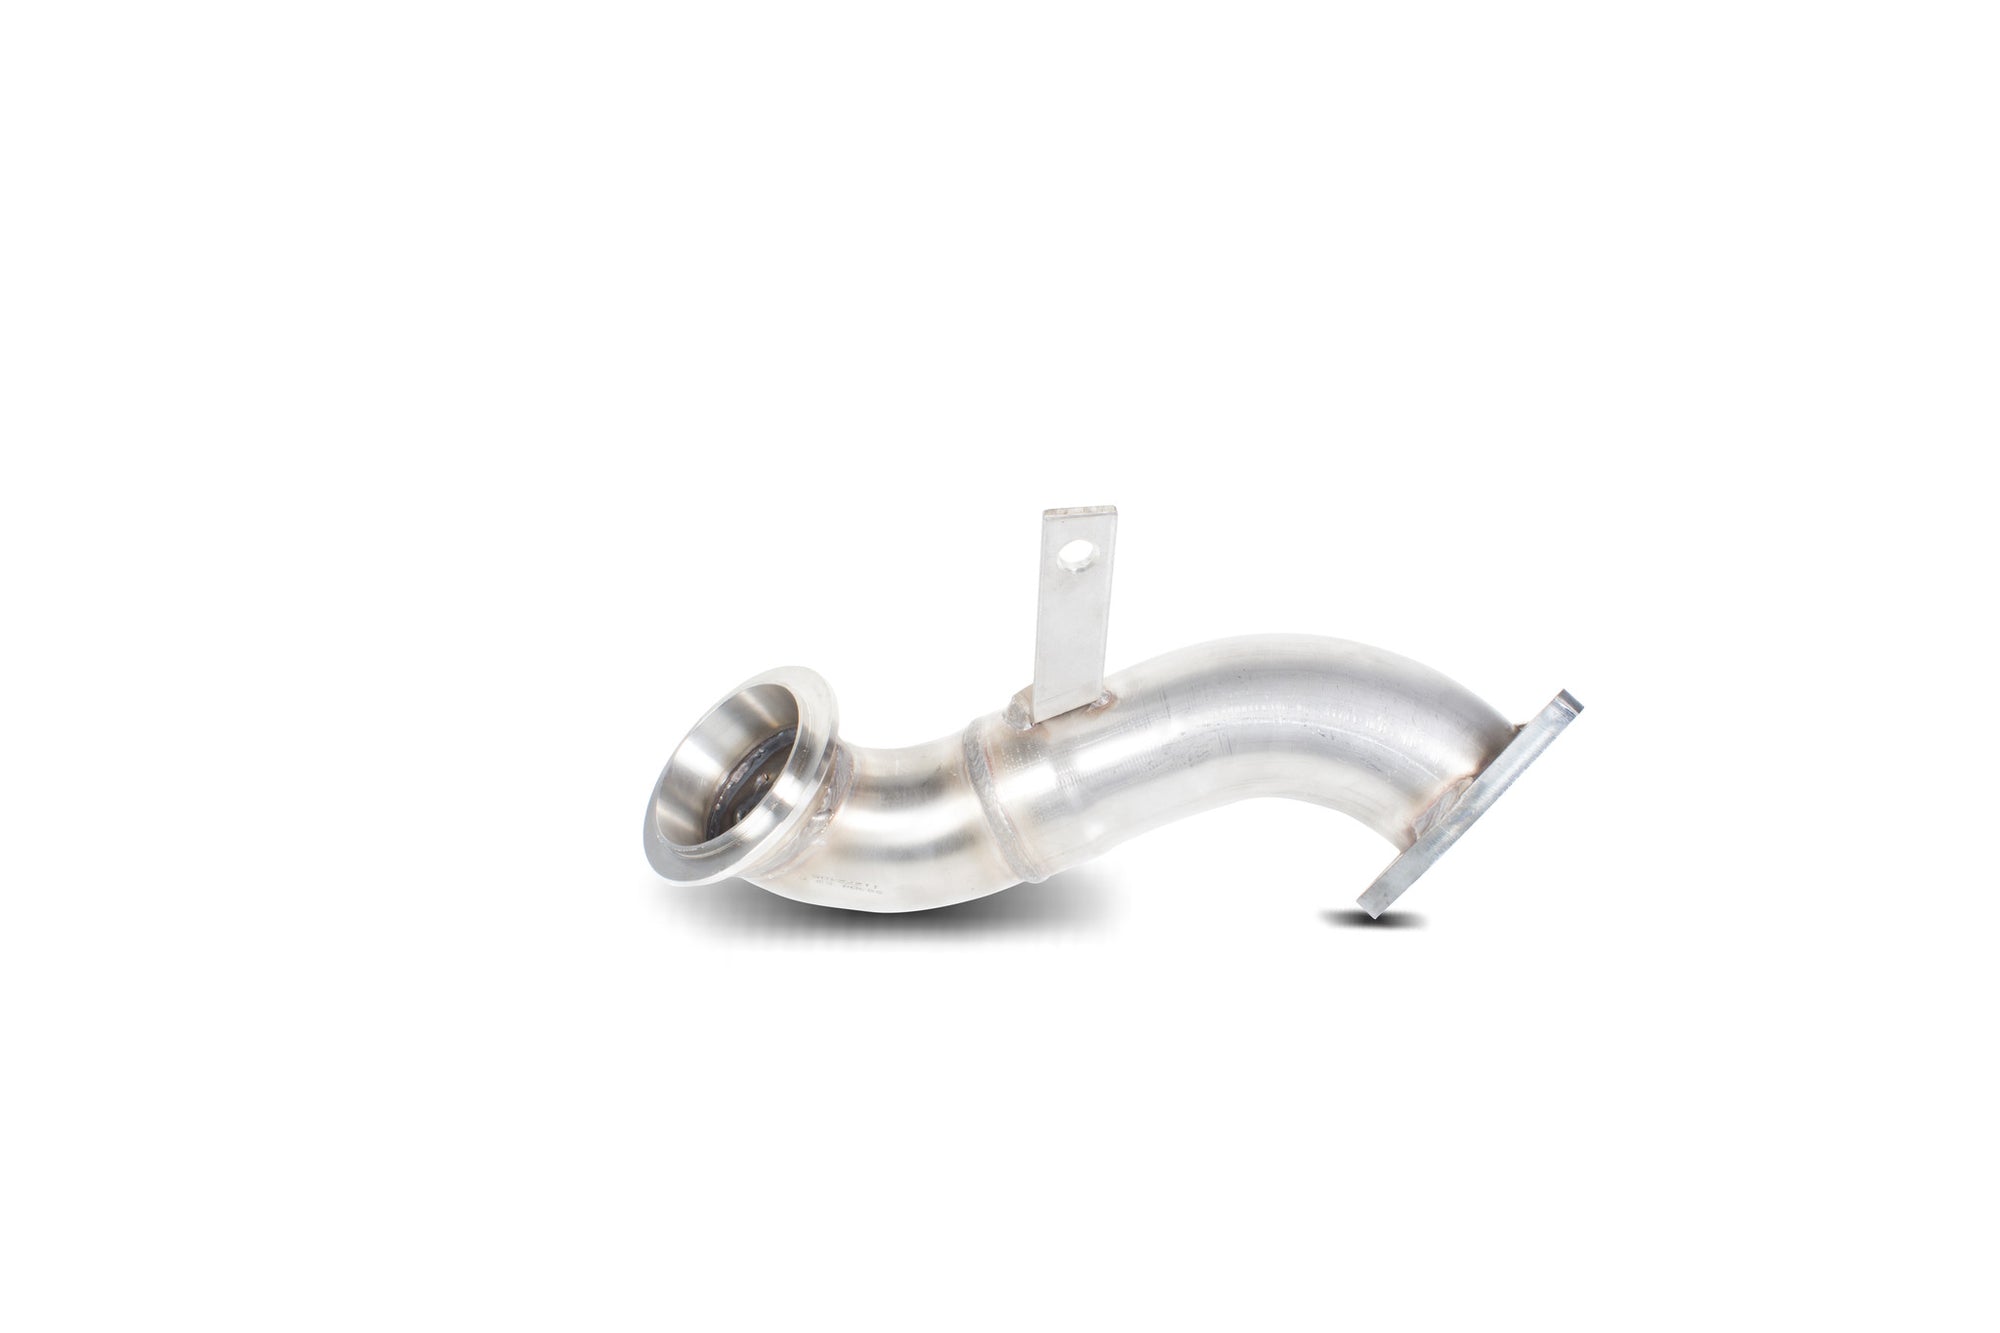 Vauxhall Corsa D 1.4 Turbo Black Edition Downpipe with no catalyst